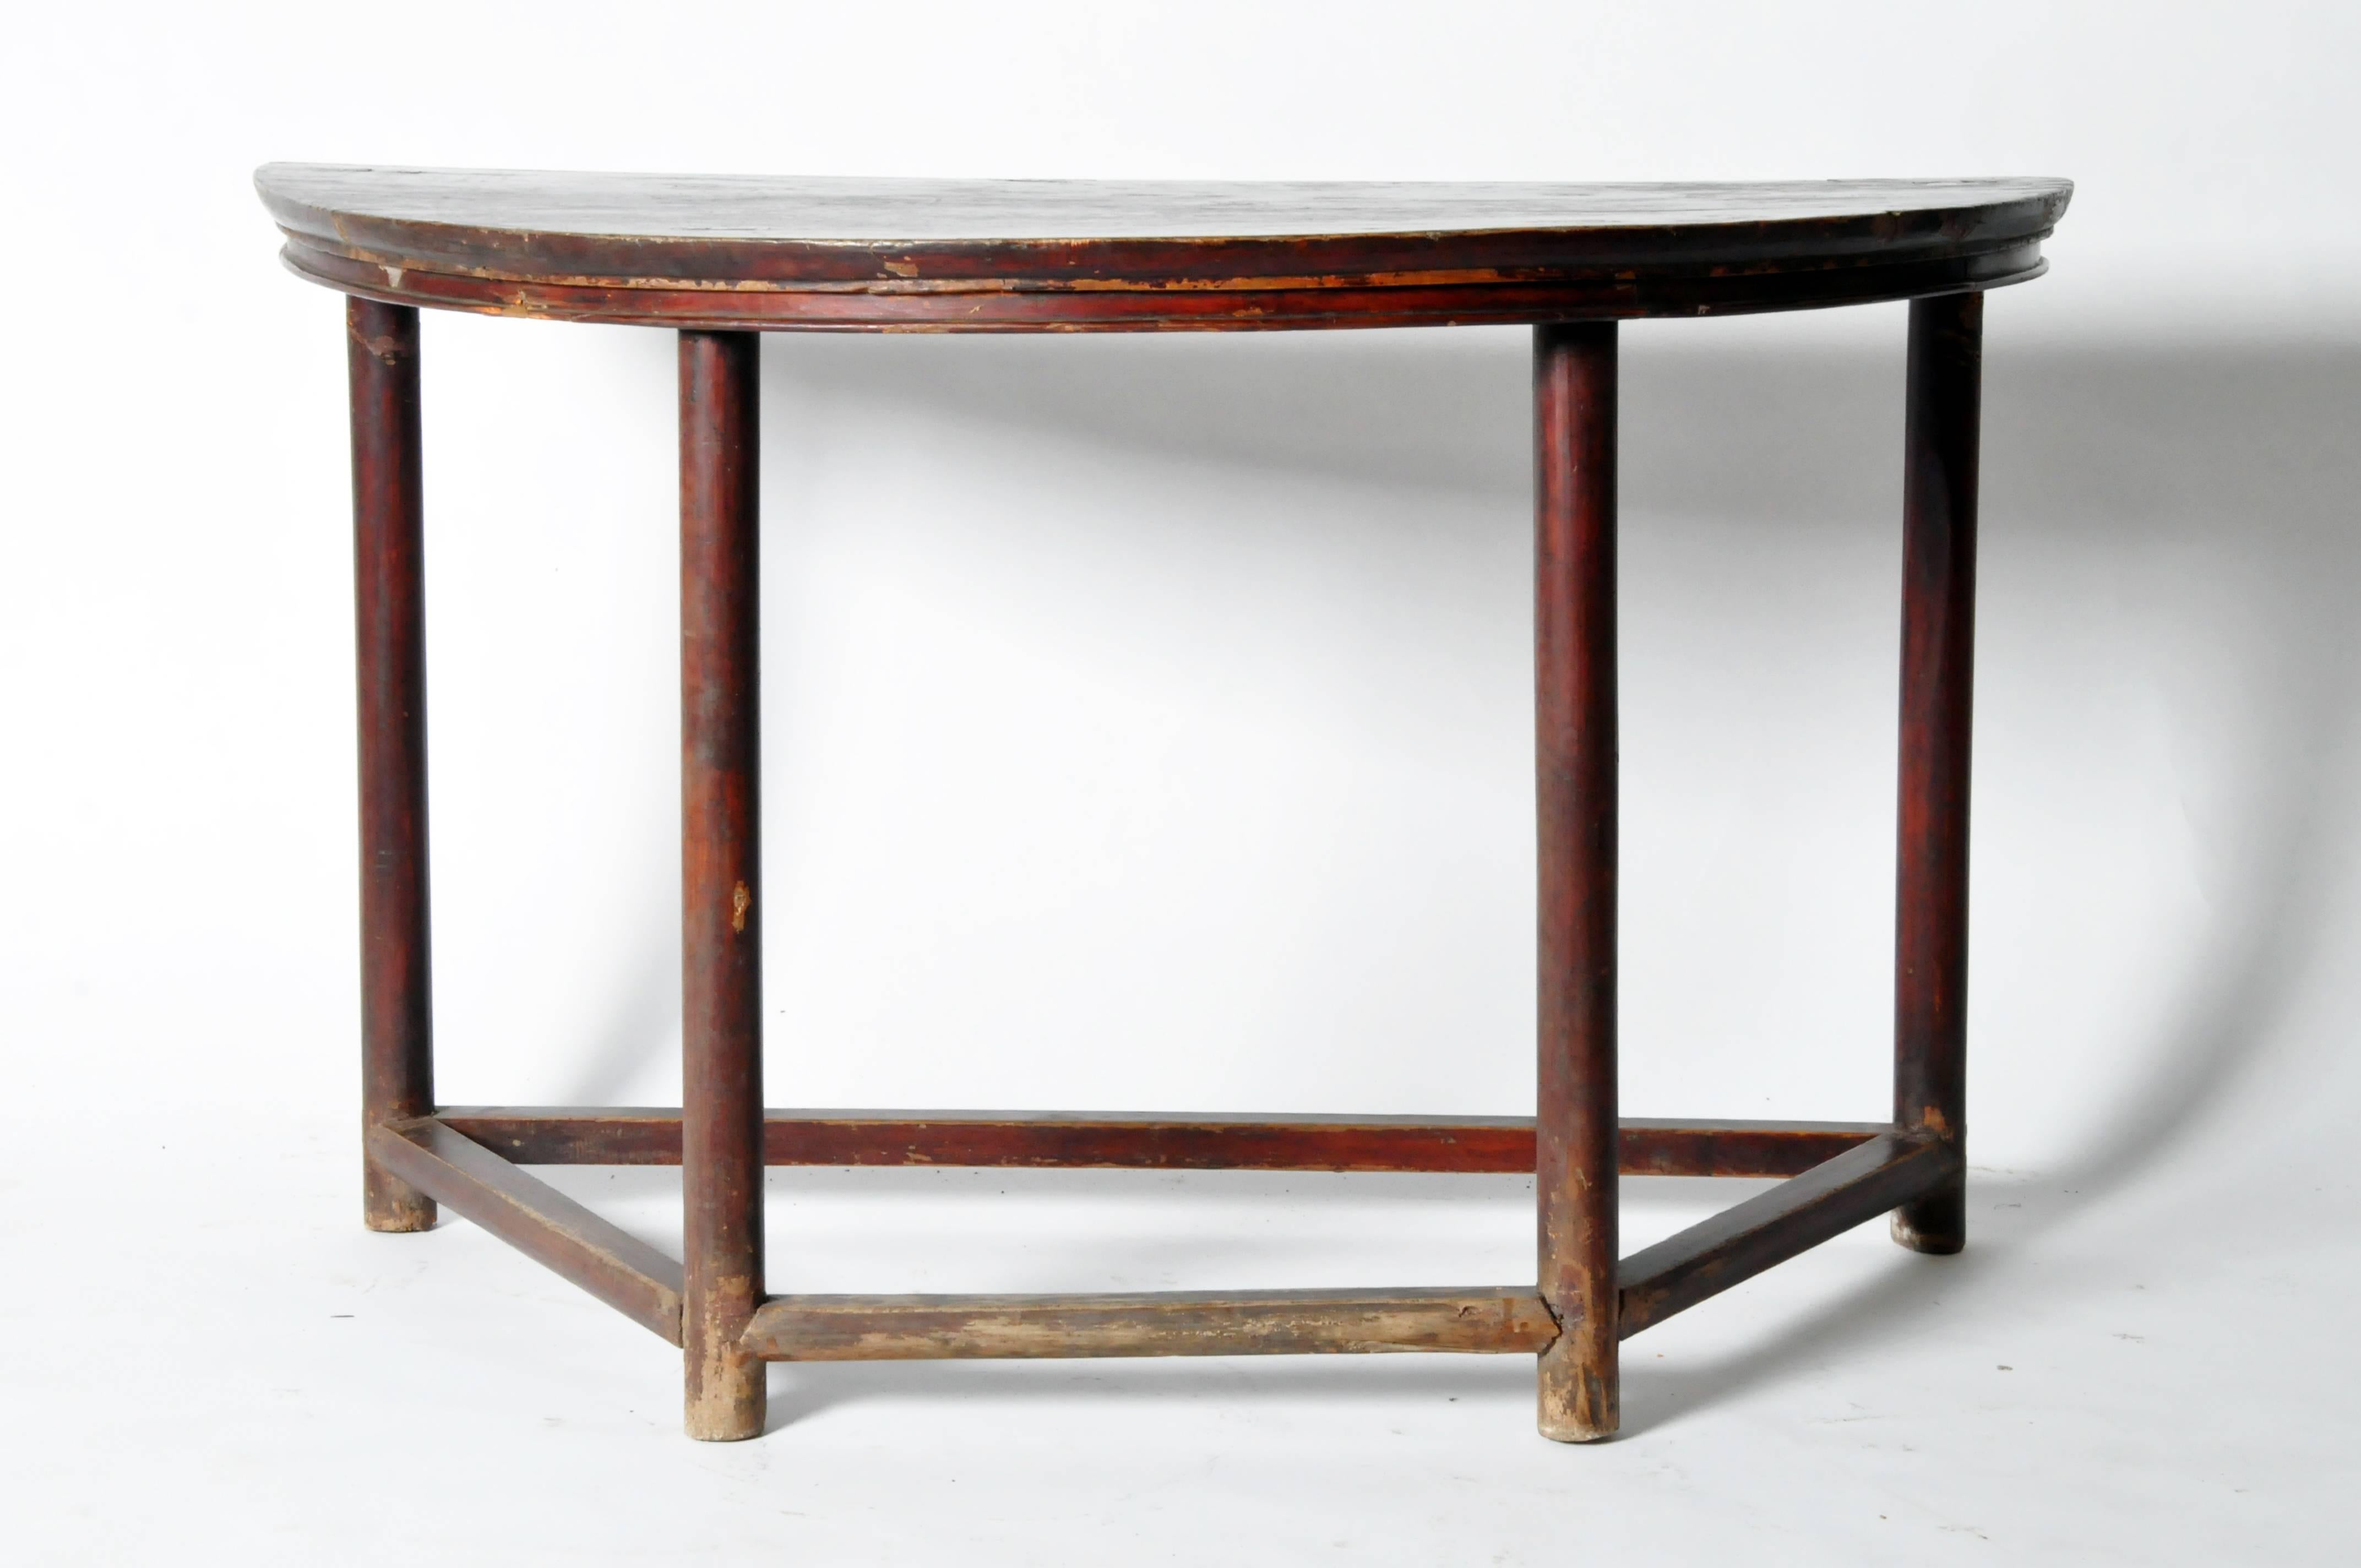 Comprised of clean lines this handsome table features a waisted top raised on four round post legs, which are connected by stretchers.